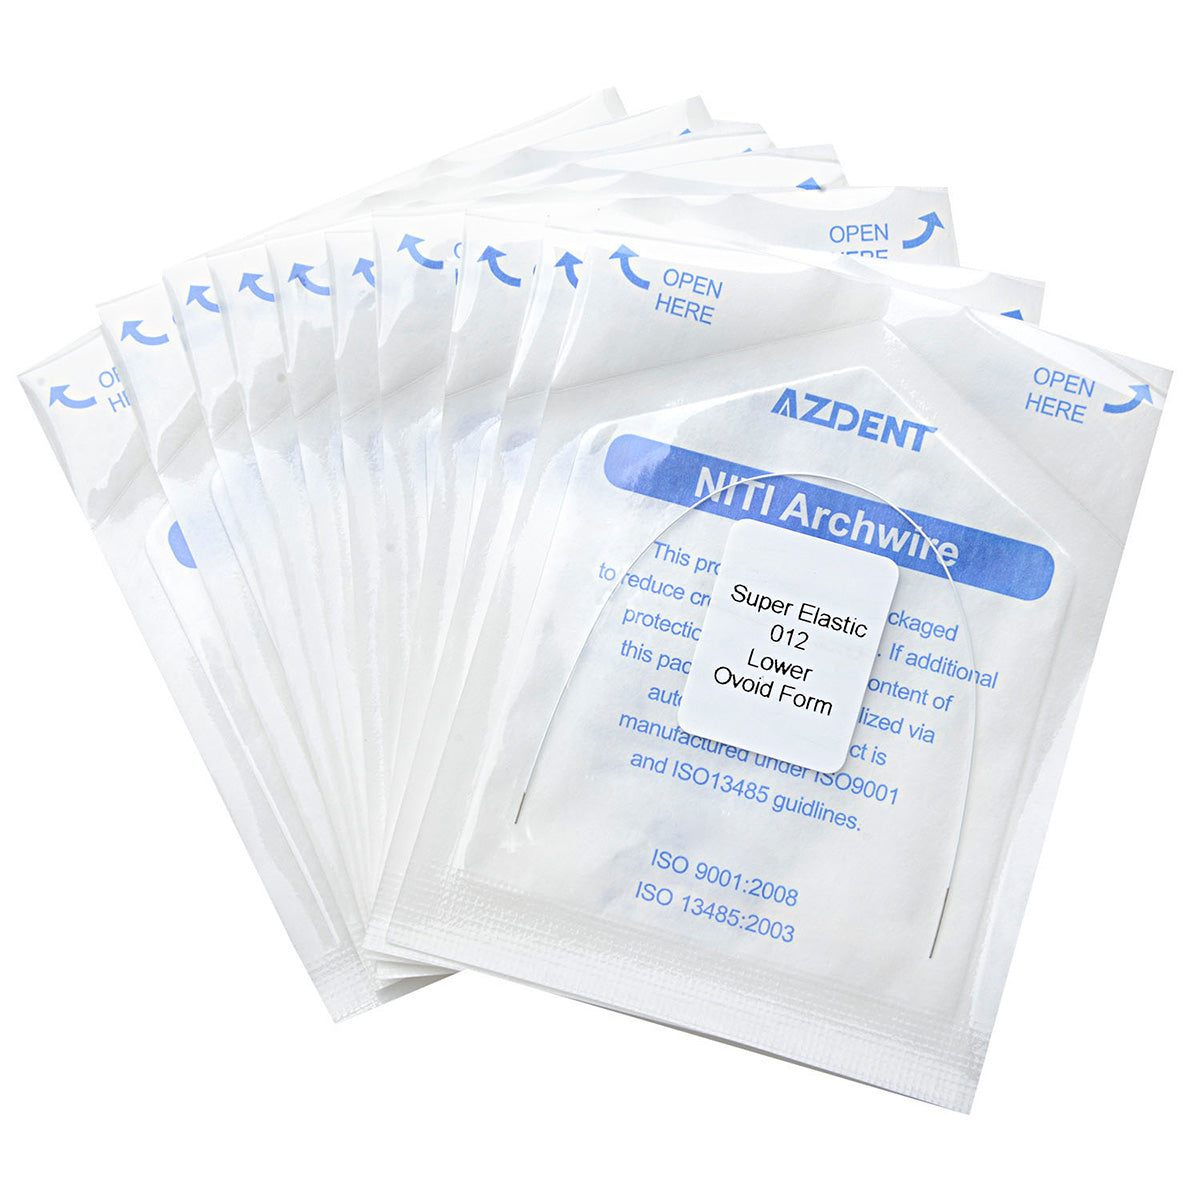 10 Packs AZDENT Archwire NiTi Super Elastic Colored Coated Ovoid Round 0.012 Lower 1pcs/Pack - azdentall.com